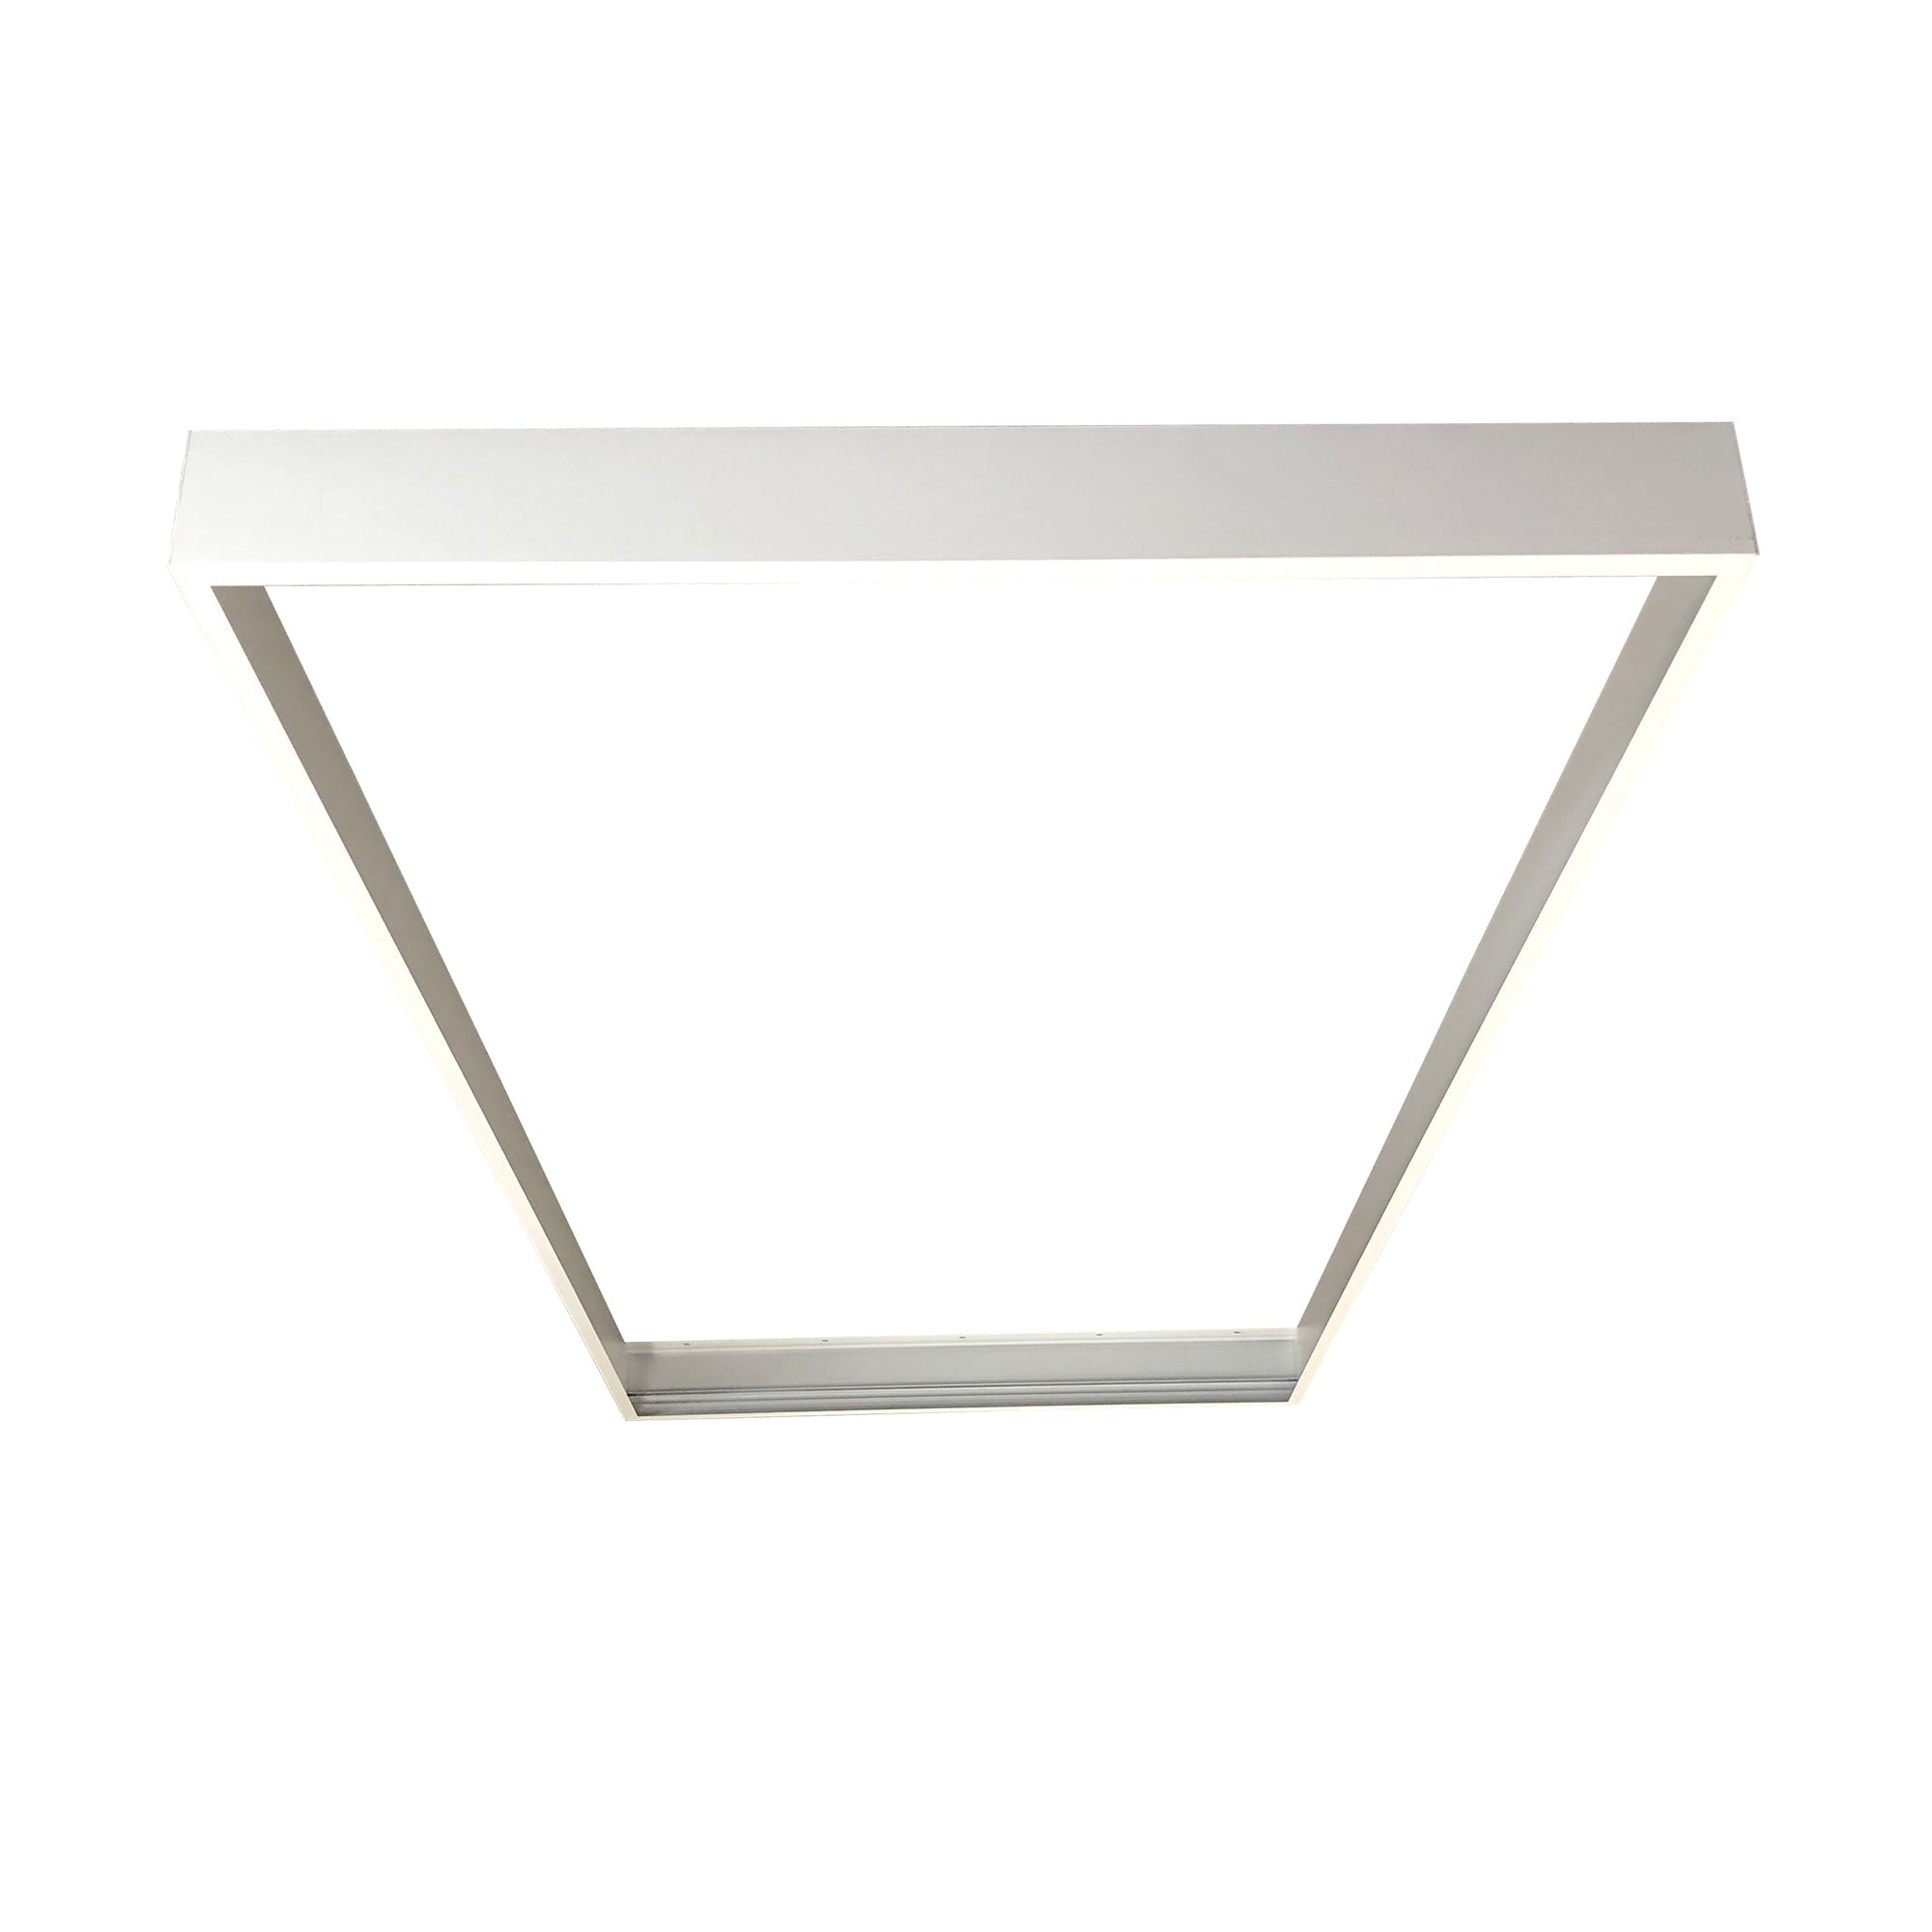 Nora Lighting NPDBL-24DFK/W - Recessed - Surface Mounting Frame for 2'x4' LED Backlit Panels